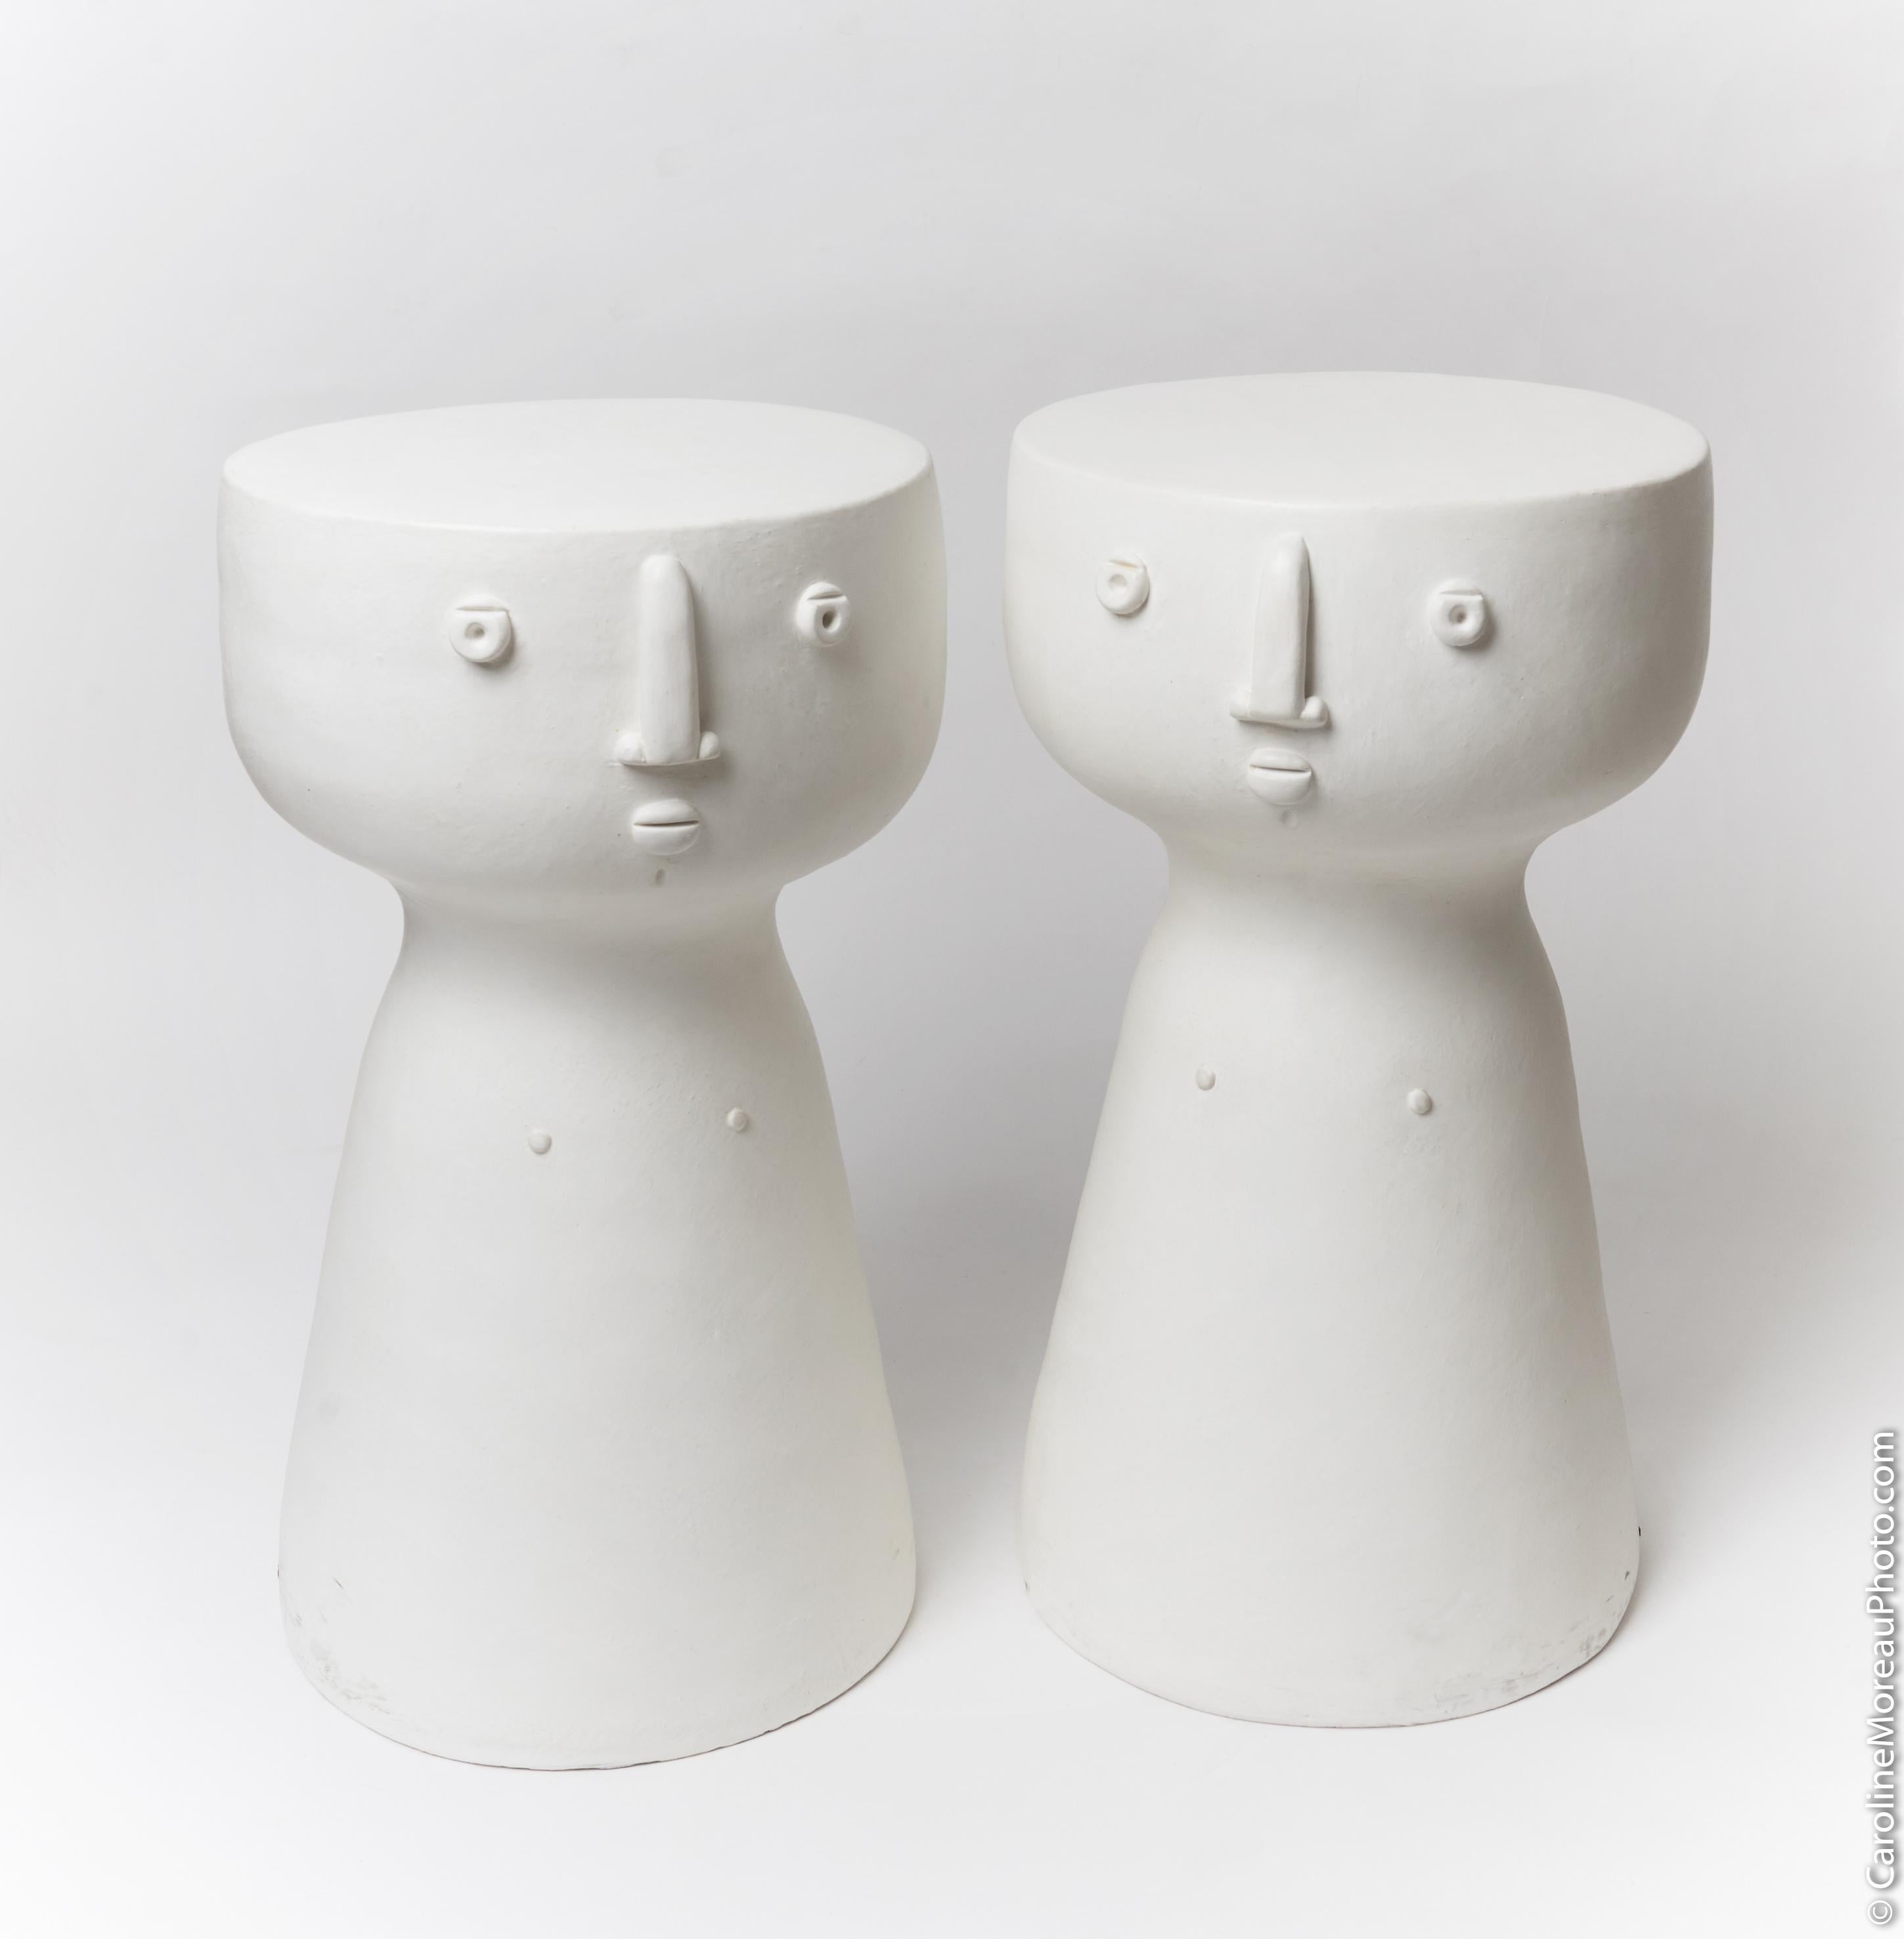 Pair of White Glazed Ceramic Stools or Side Tables, Unique Pieces by Dalo In Excellent Condition For Sale In Paris, FR